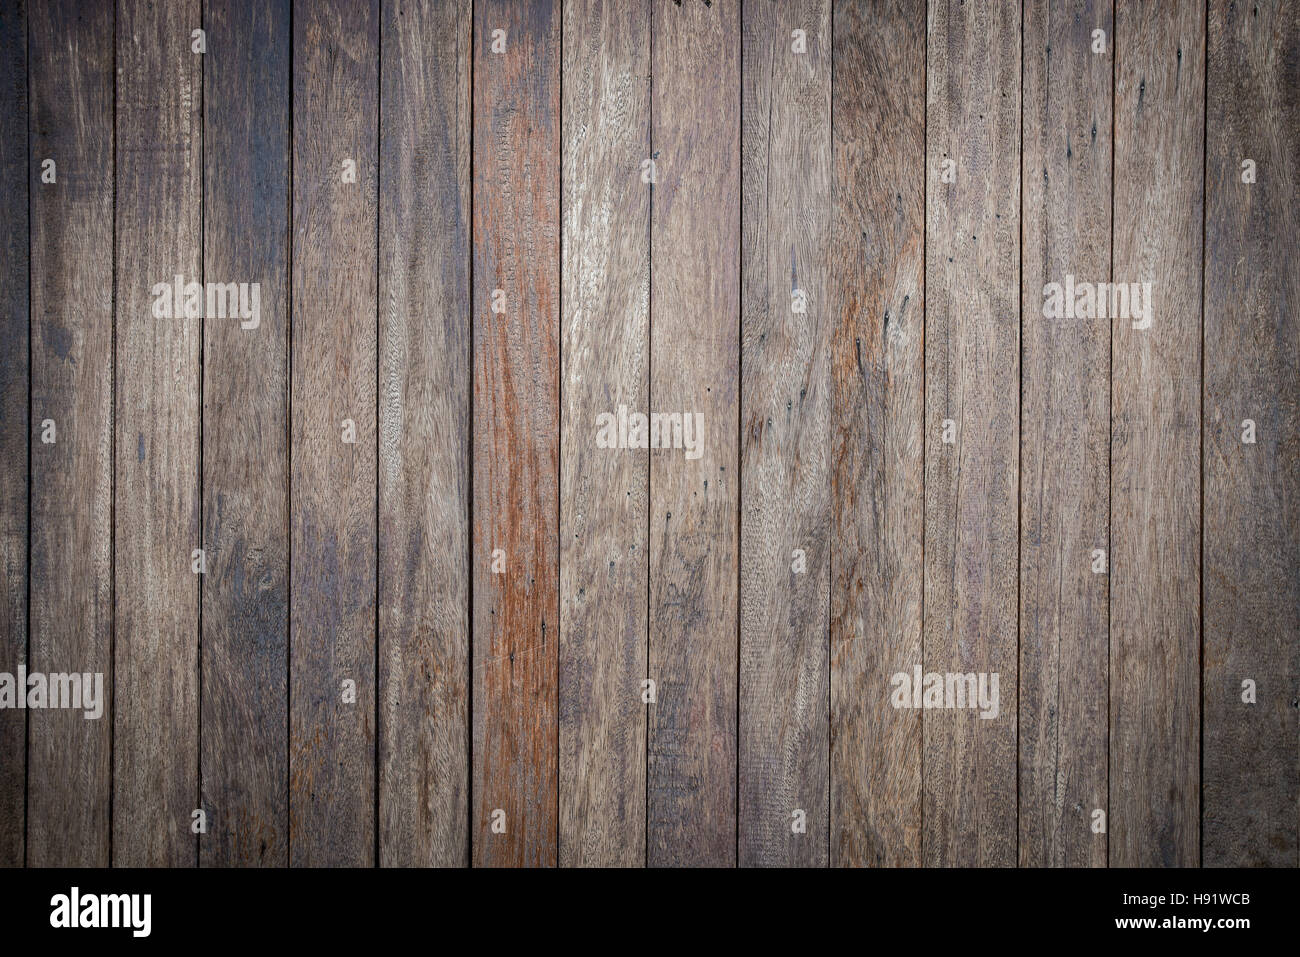 timber wood brown oak panels used as background Stock Photo